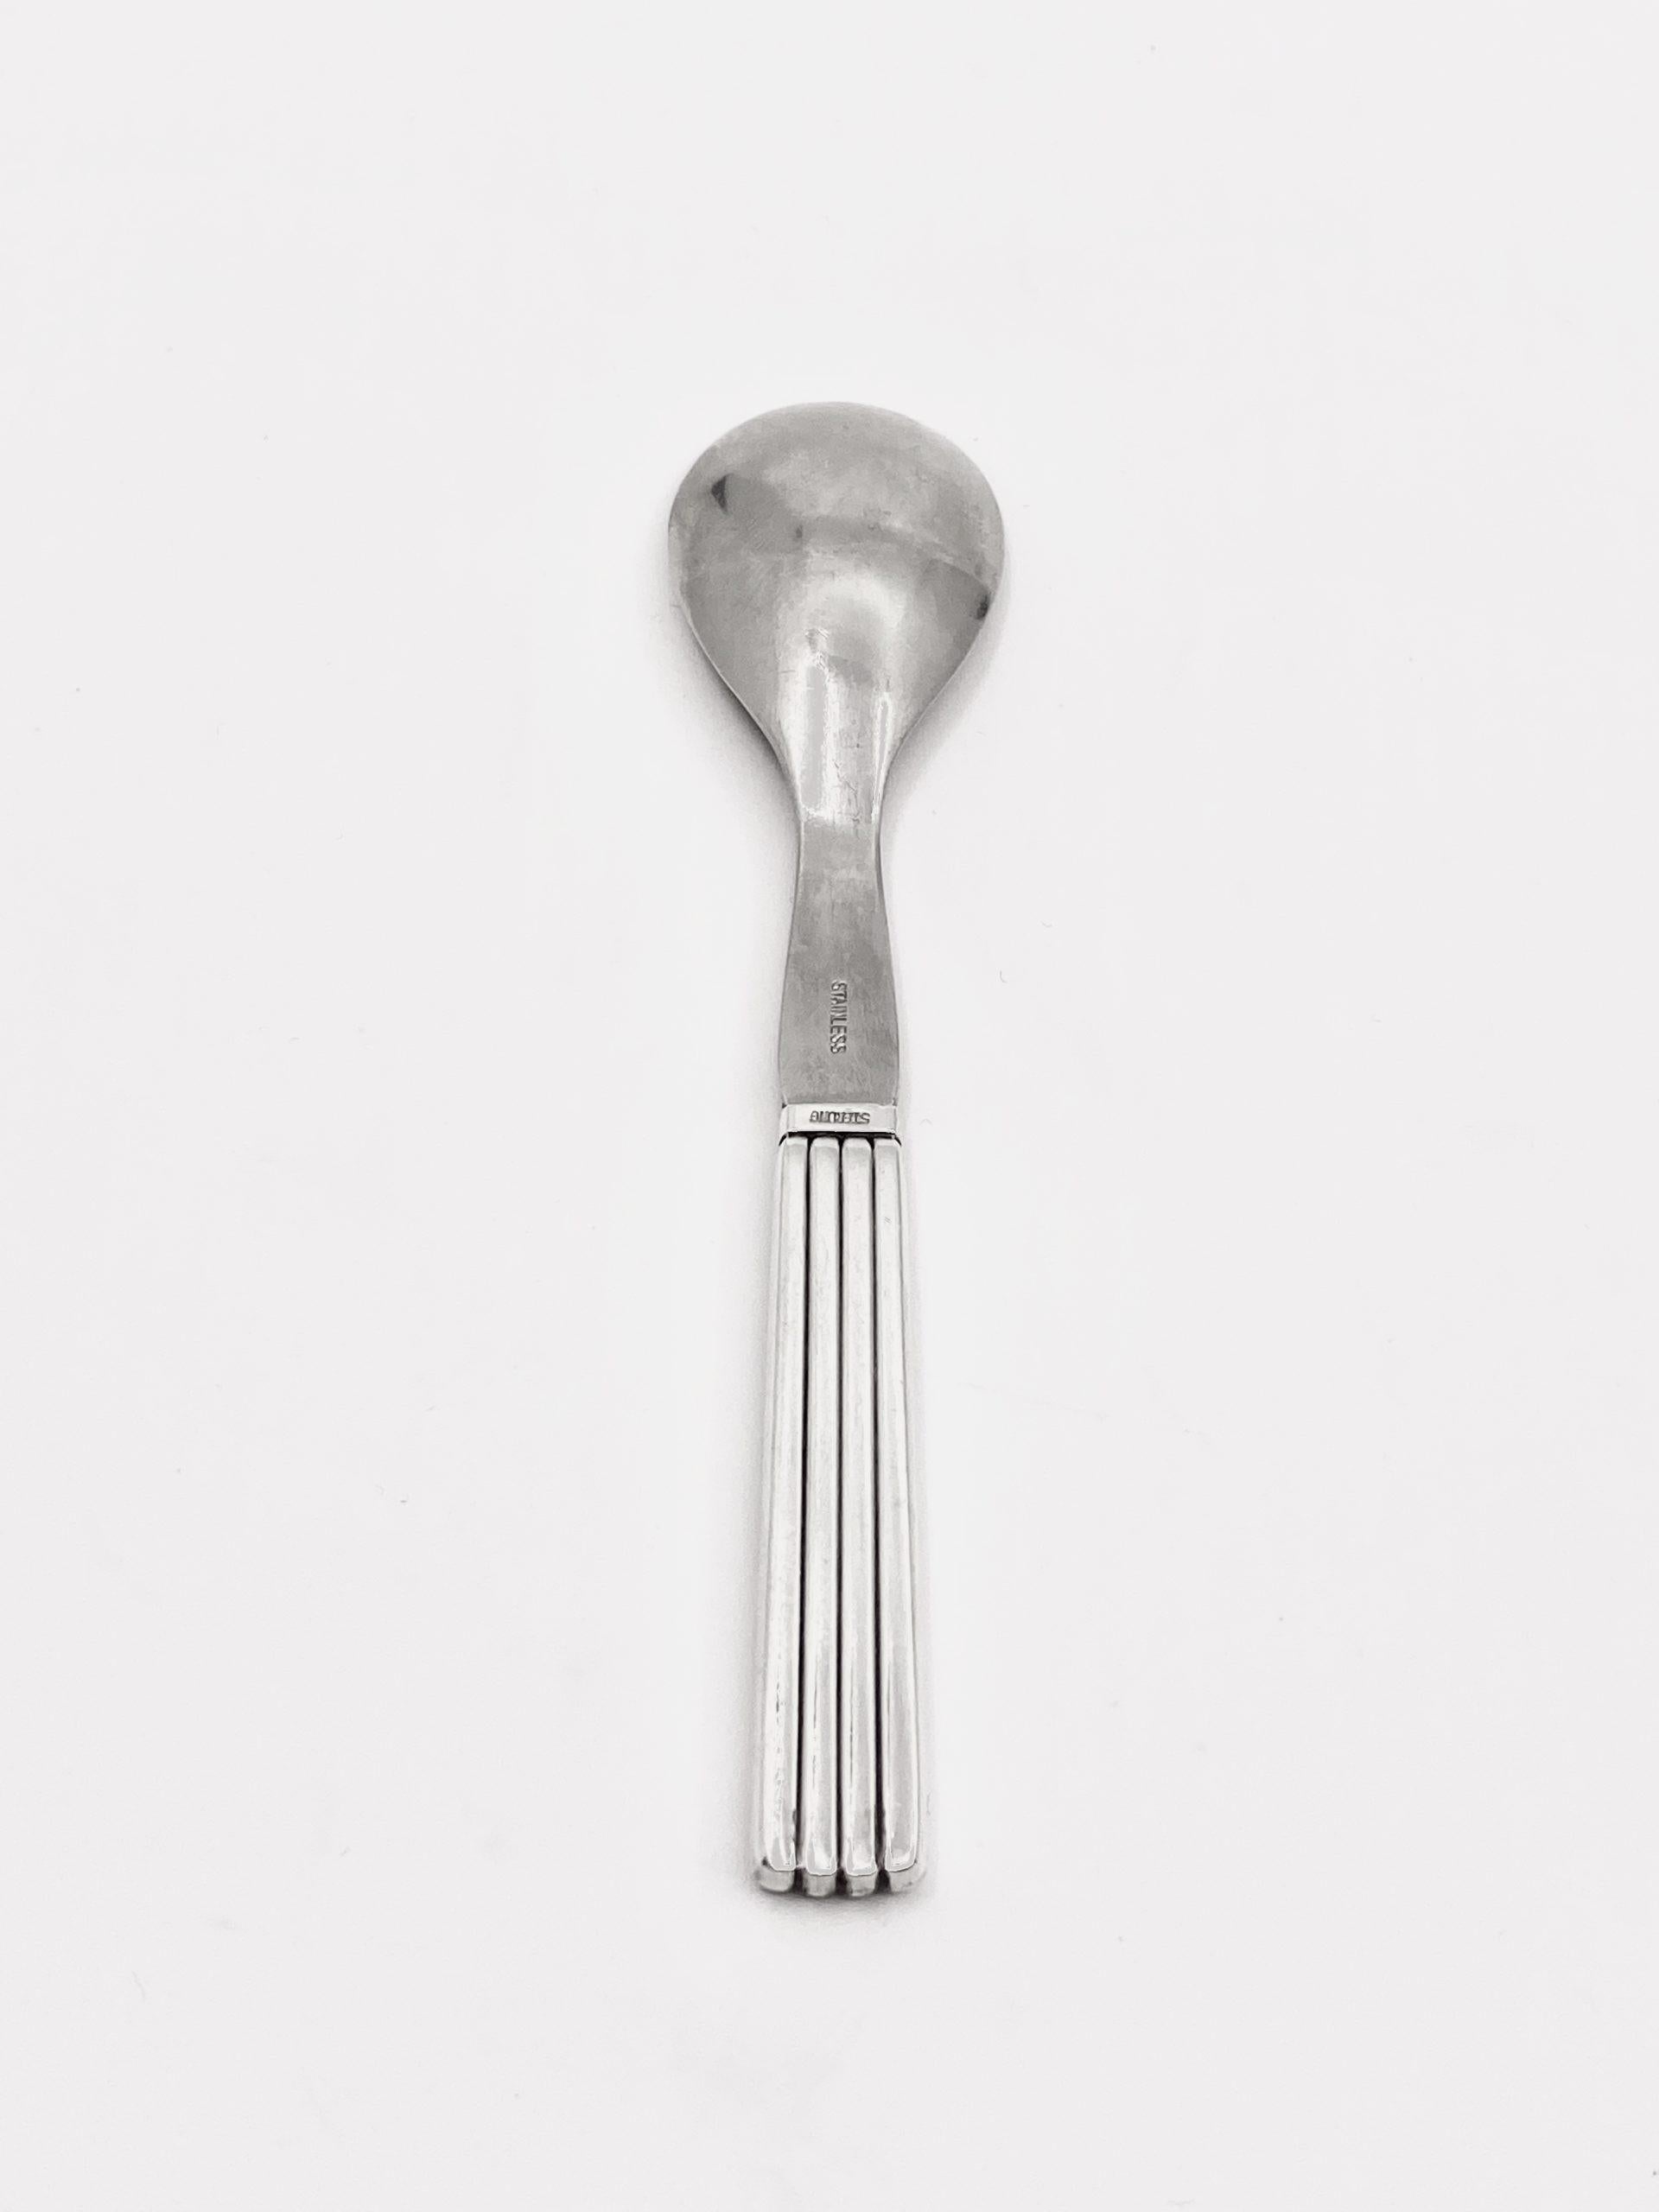 A Georg Jensen egg spoon, sterling silver handle and stainless steel spoon, item #085 in the Bernadotte pattern, design #9 by Sigvard Bernadotte in 1939.

Additional information:
Material: Sterling silver
Styles: Art Deco
Hallmarks: With Georg